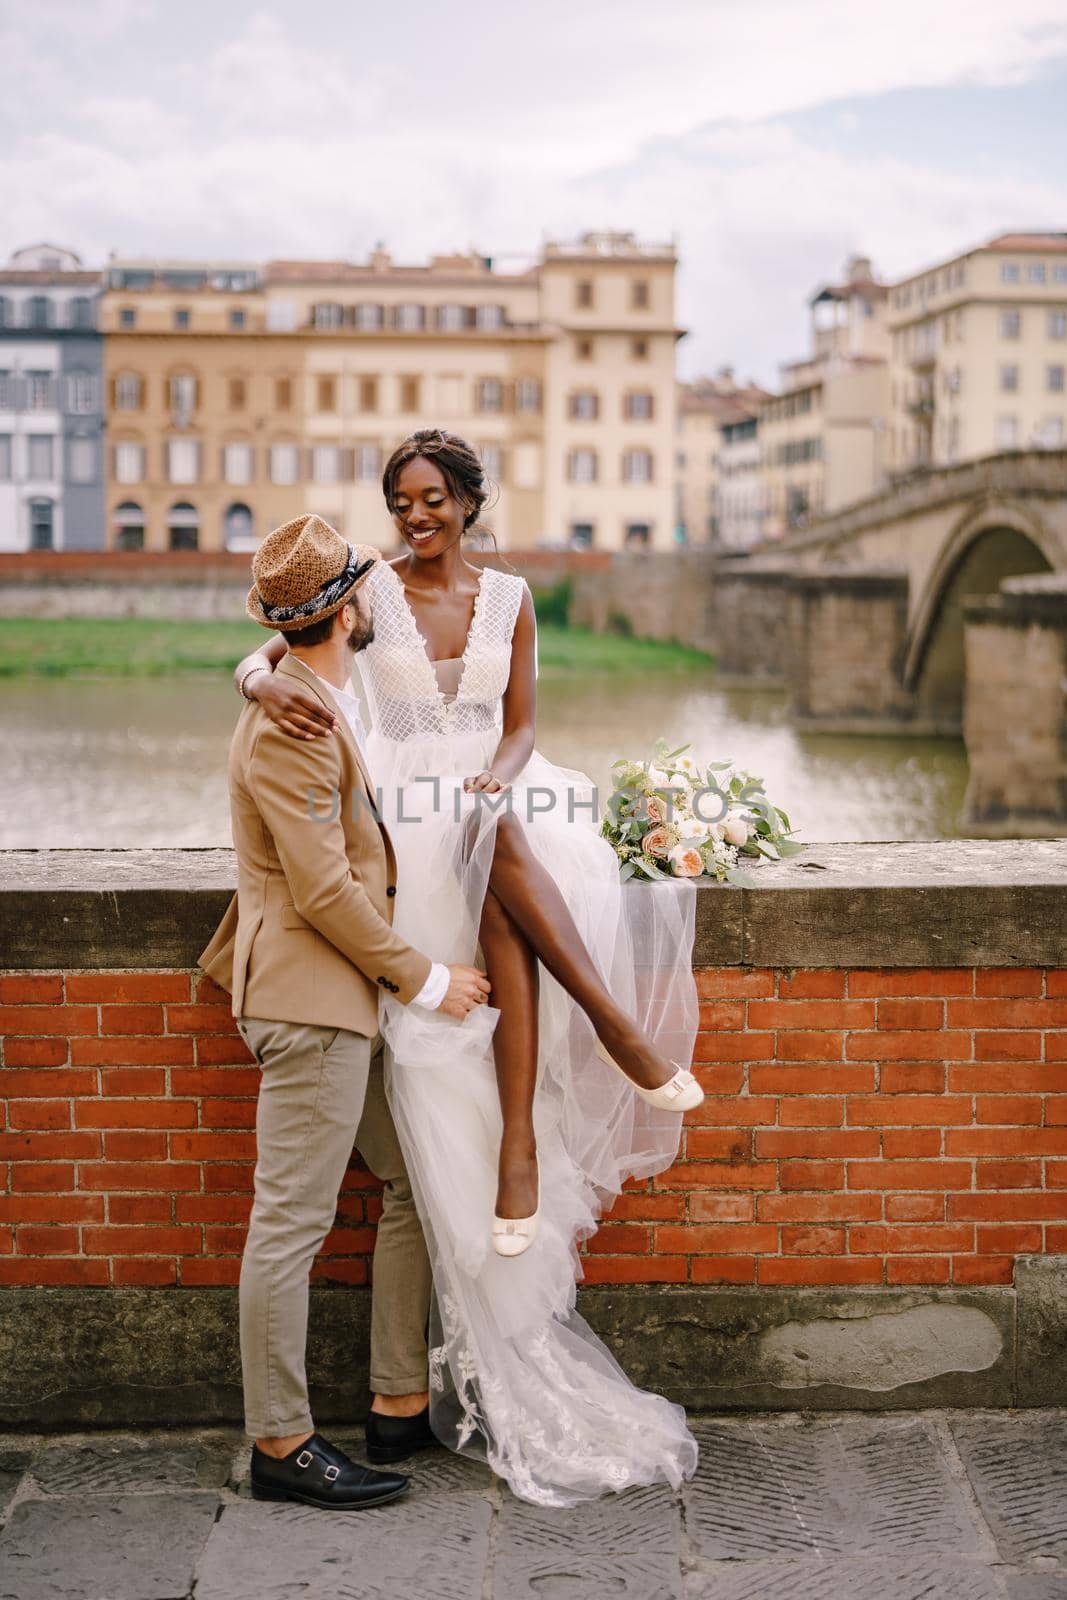 An African-American bride sits on a brick wall and a Caucasian groom hugs her. The embankment of the Arno River, overlooking city and bridges. Interracial wedding couple. Wedding in Florence, Italy.